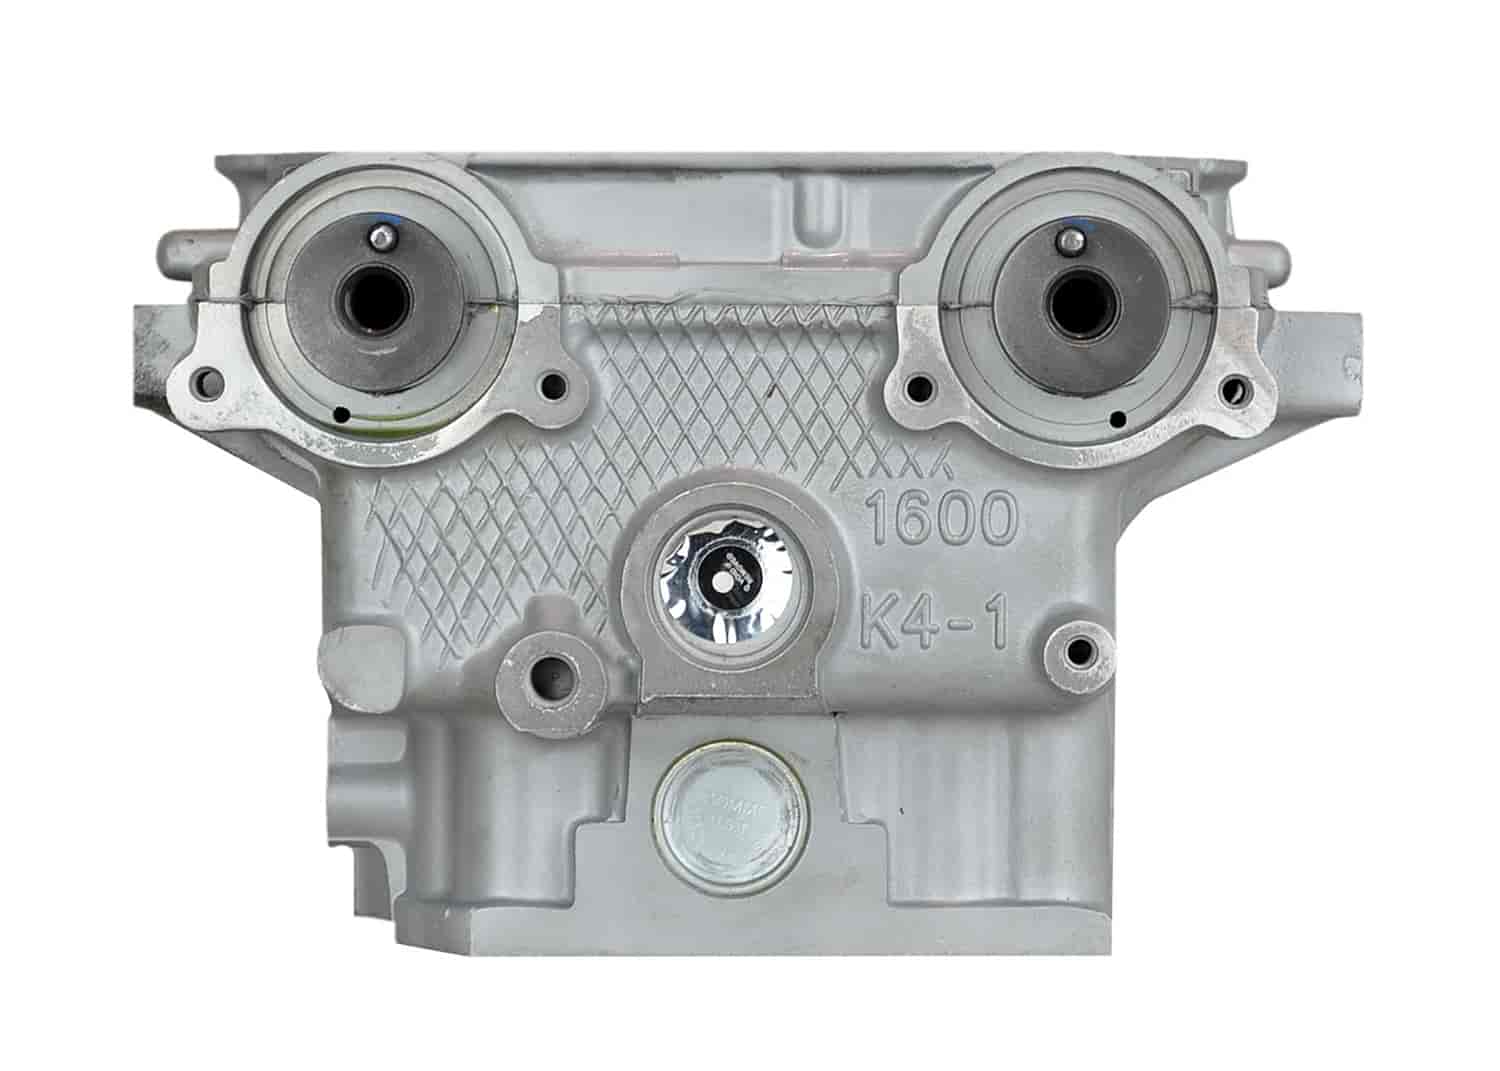 Remanufactured Cylinder Head for 2003-2005 Kia Rio with